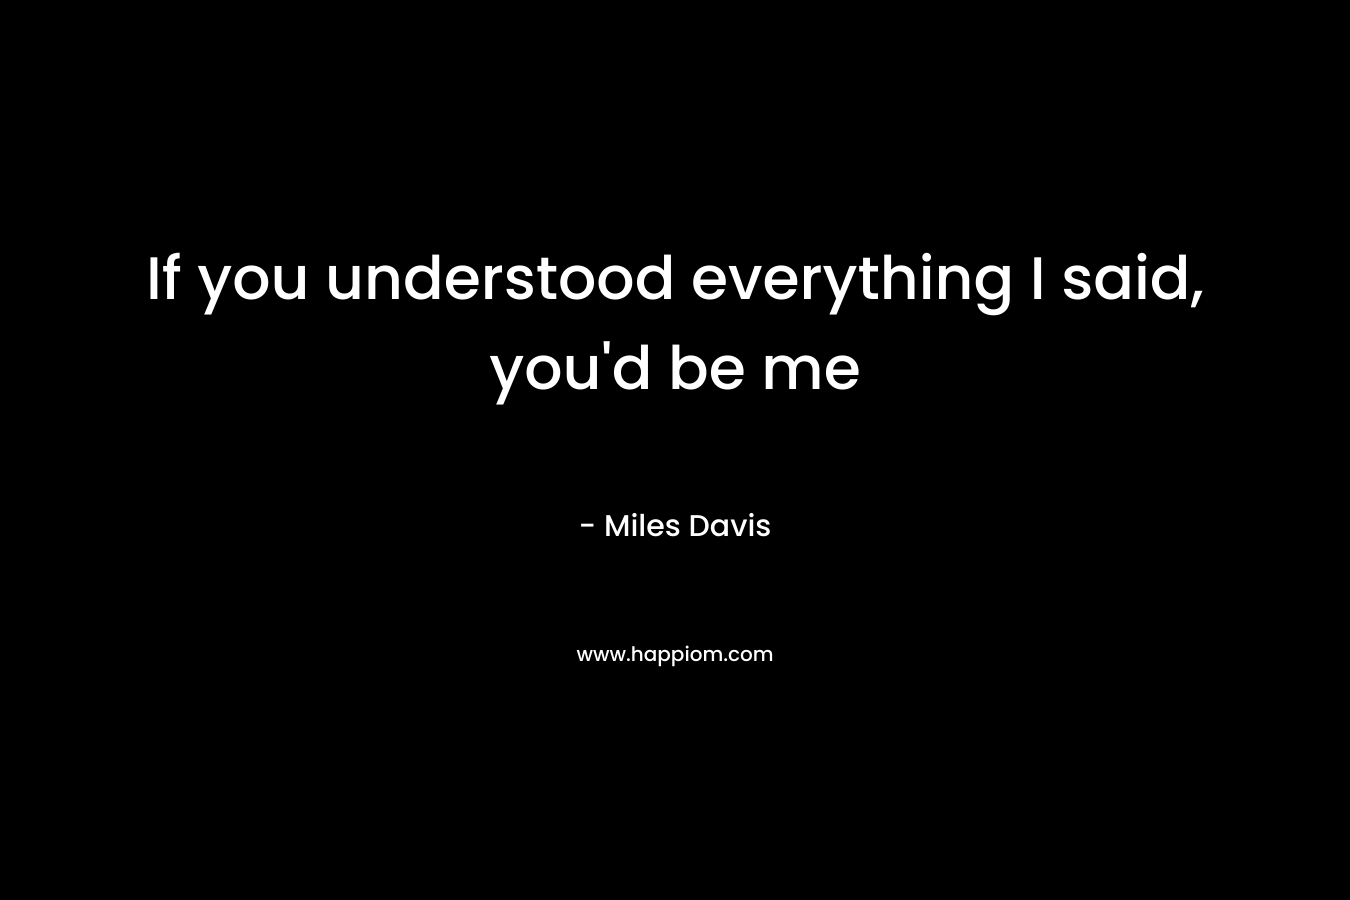 If you understood everything I said, you’d be me – Miles Davis